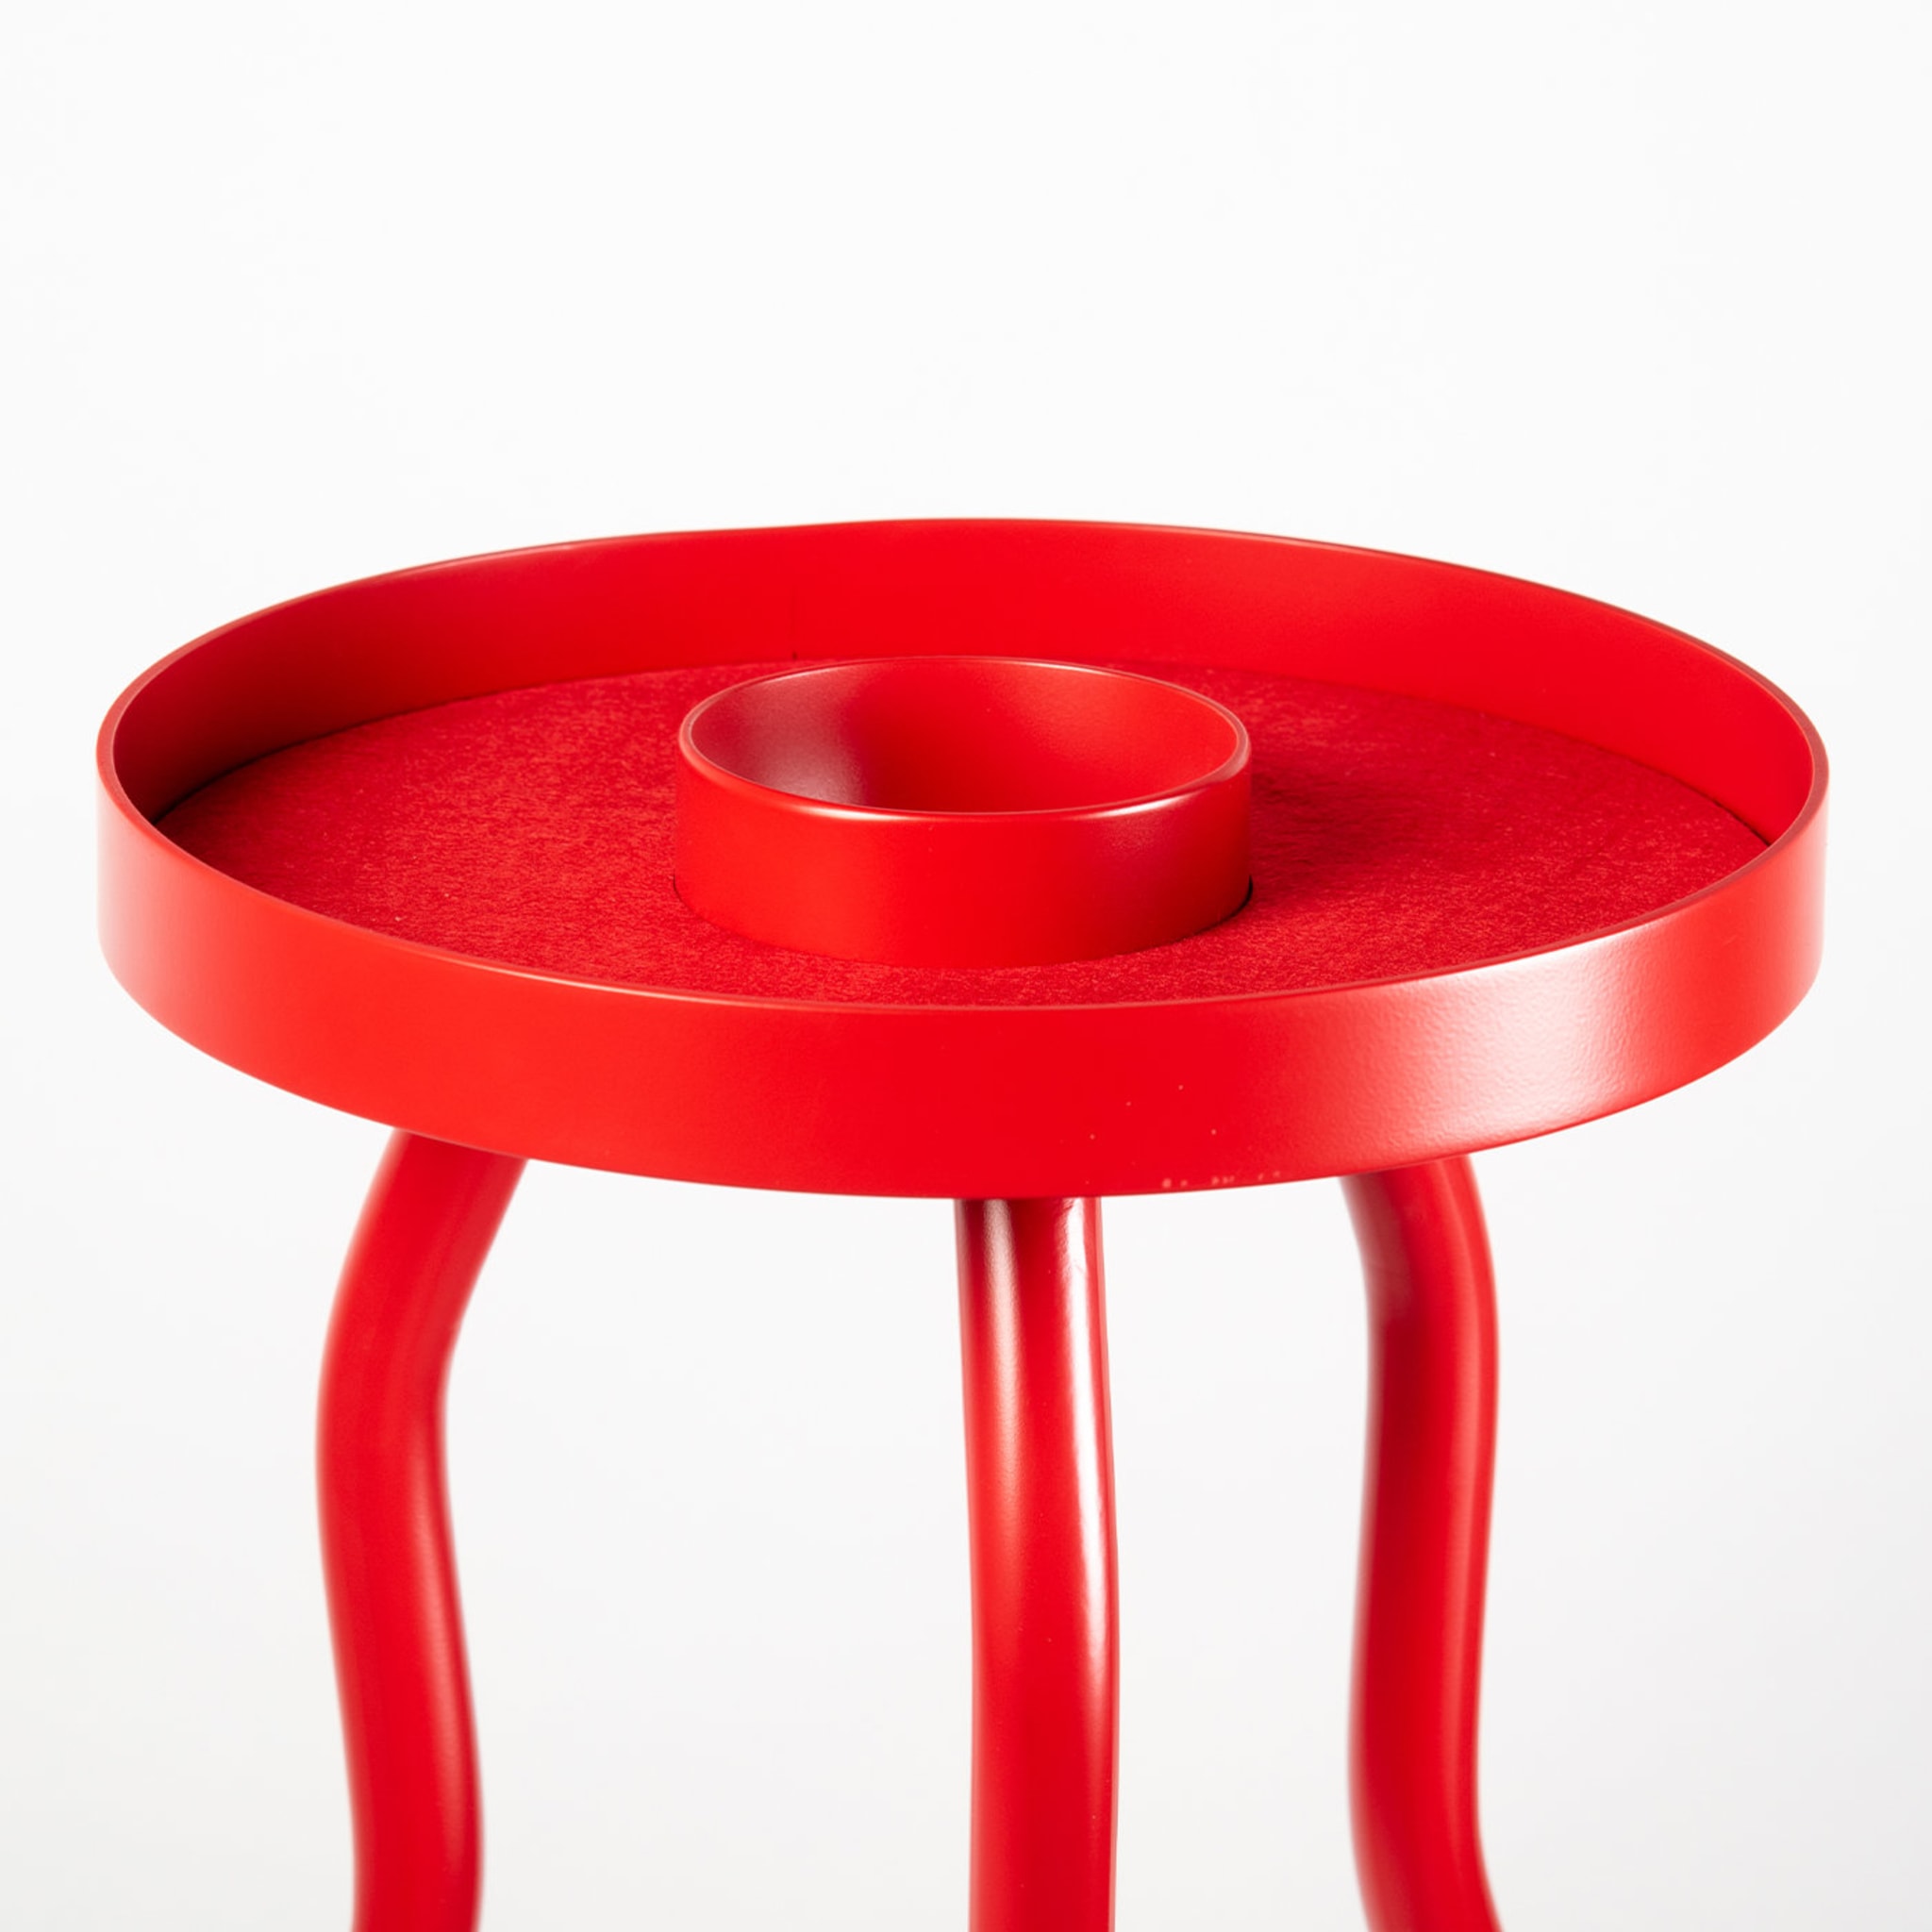 Tremulo Red Empty-Pocket Tray with Stand - Alternative view 3